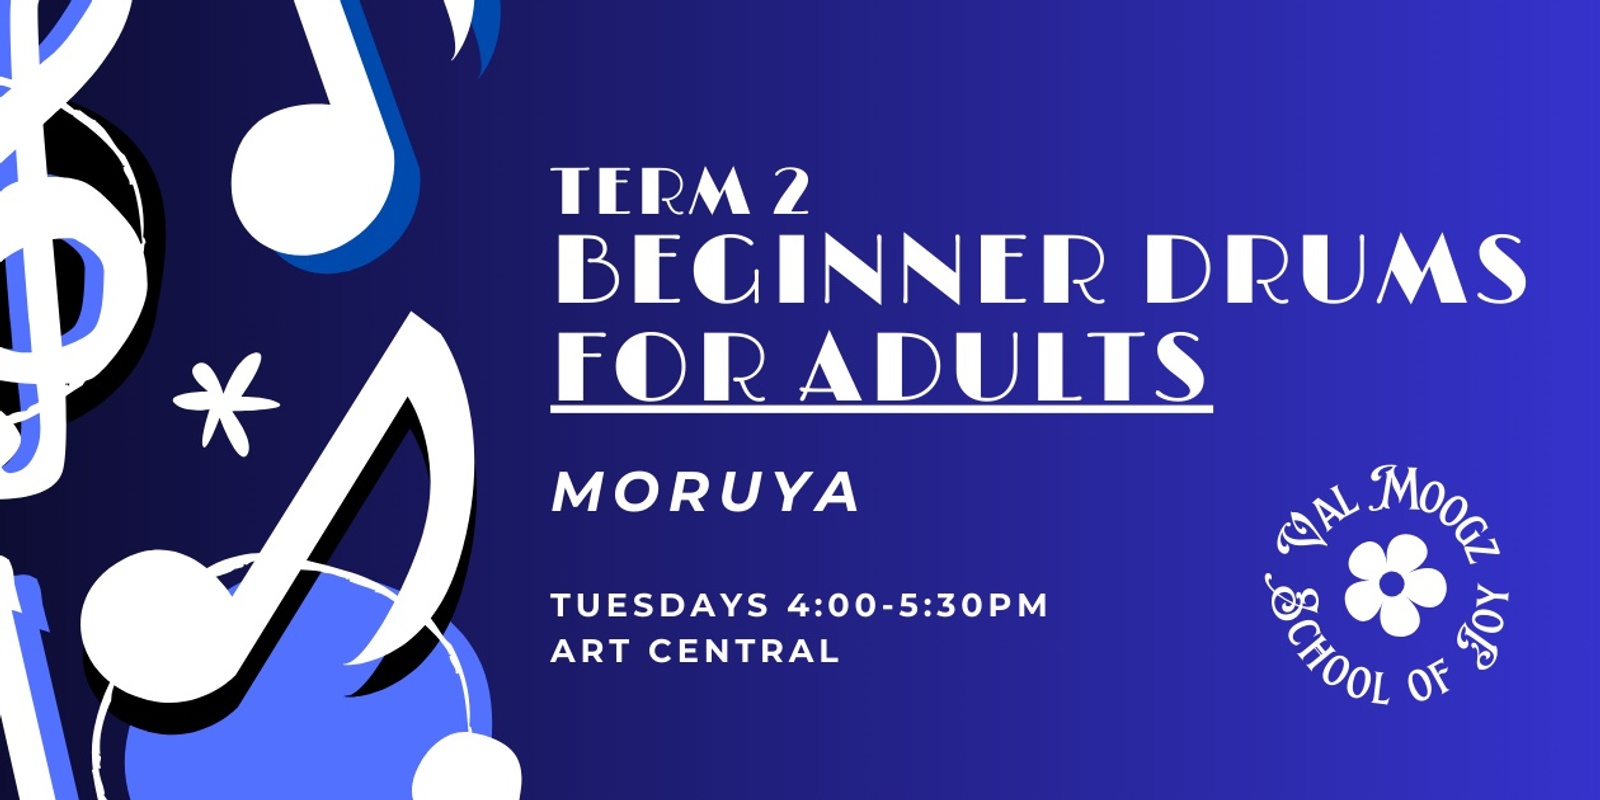 Banner image for Term 2 - Beginner Drums for Adults - Moruya